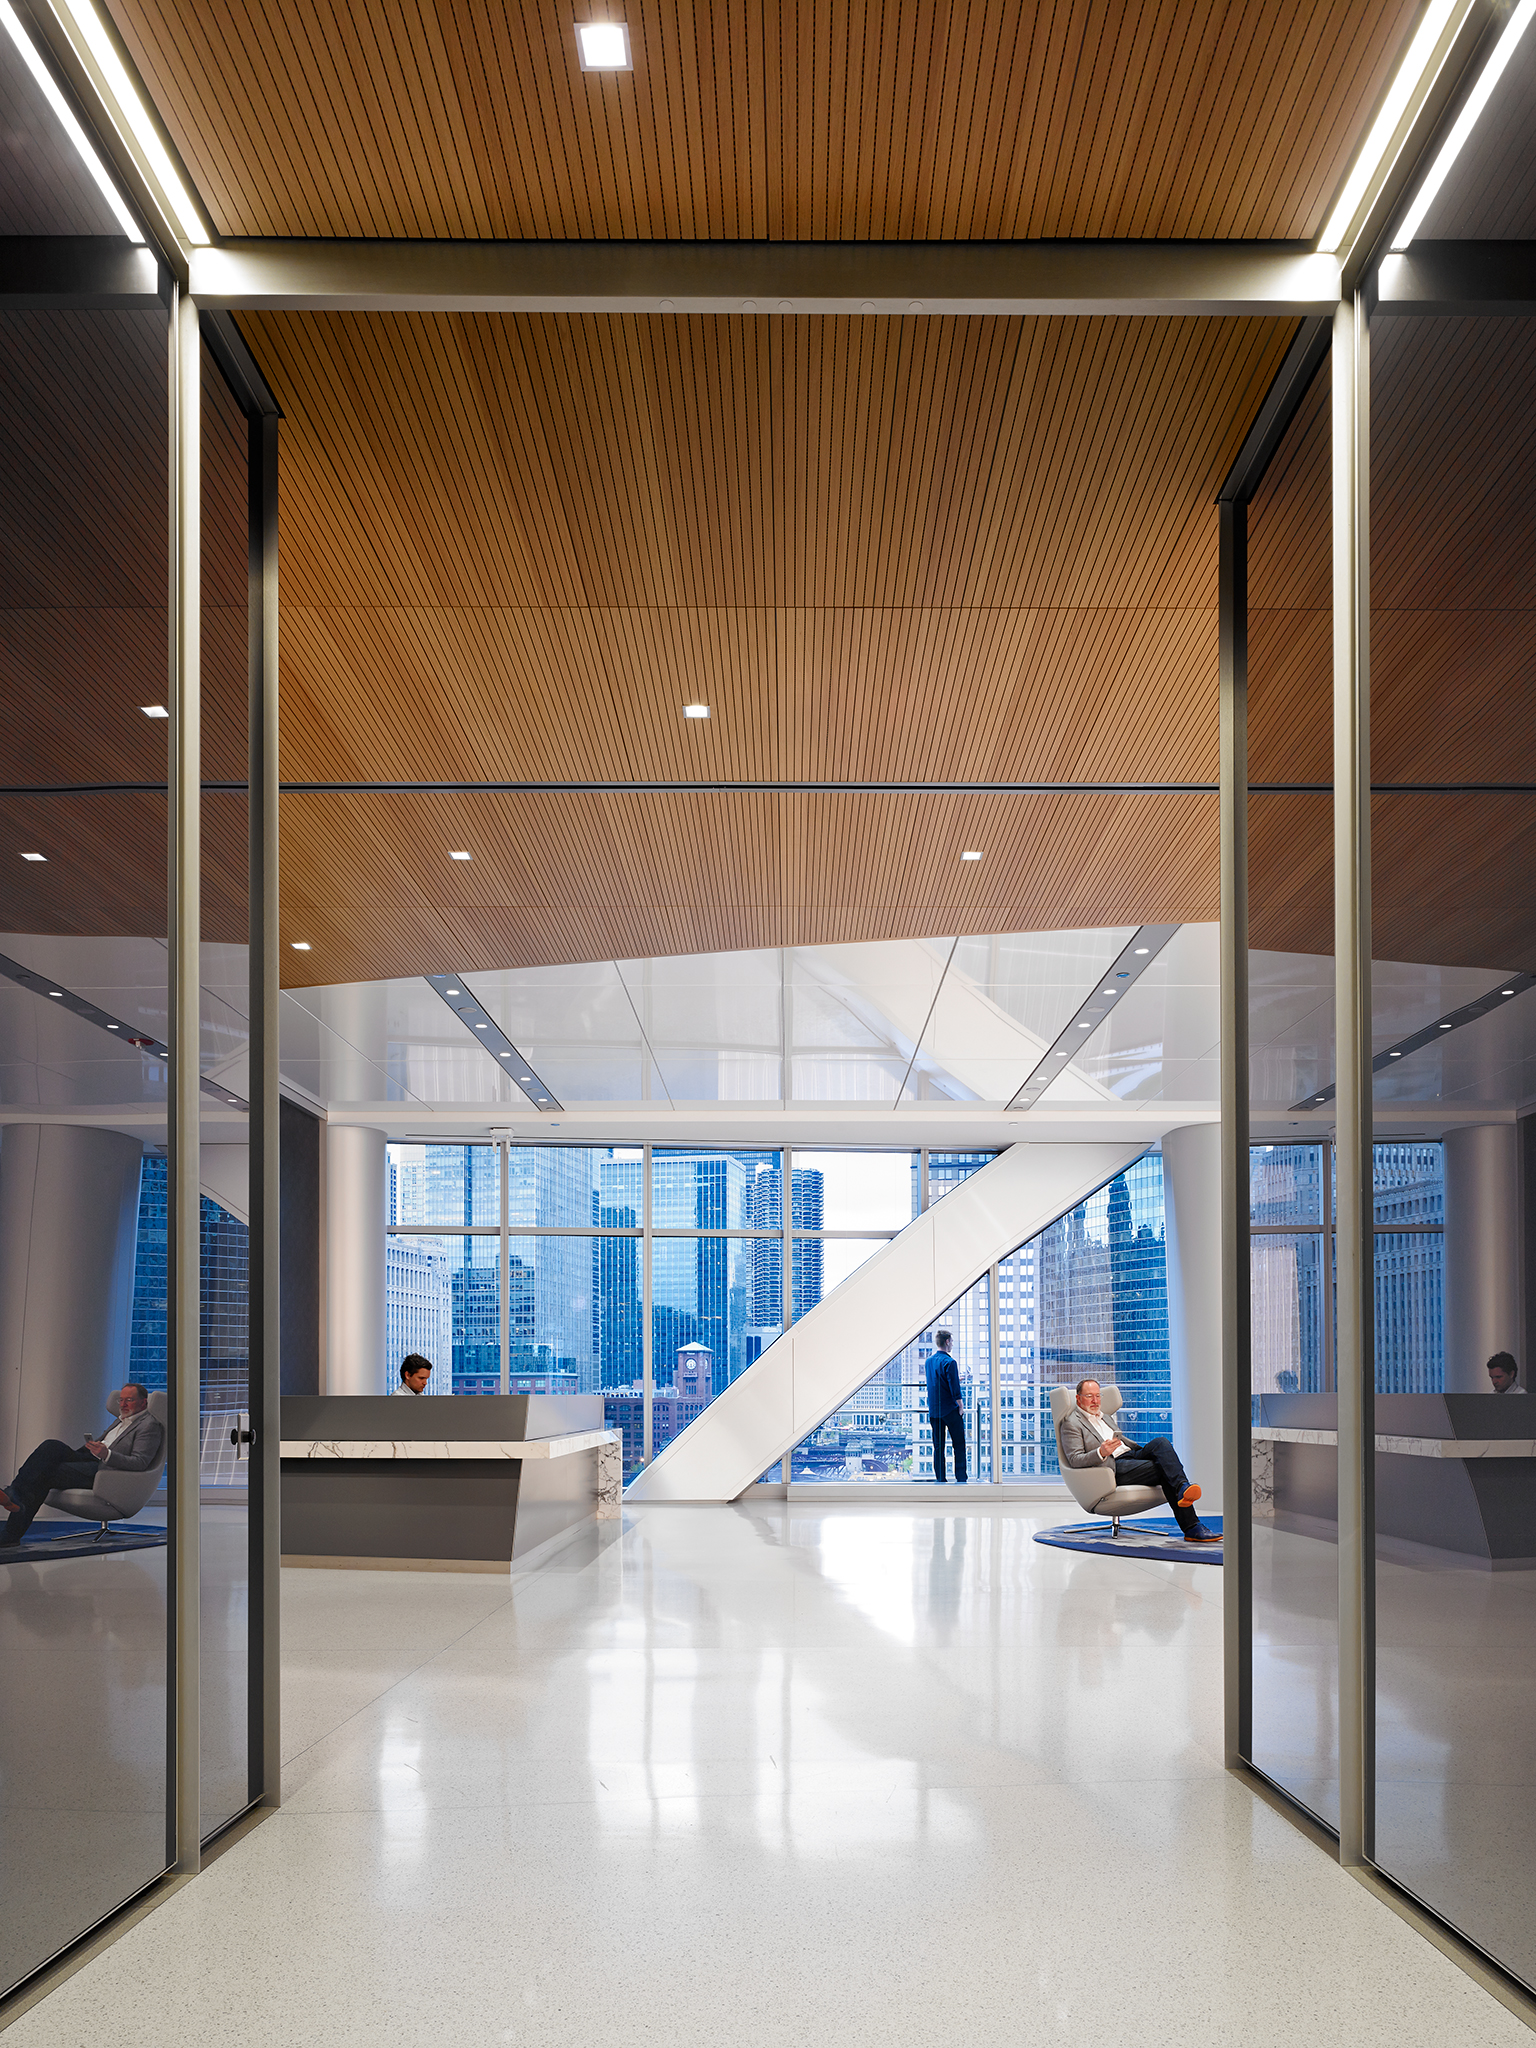  DLA Piper LLP  Gensler  Chicago, IL      Return to Projects  